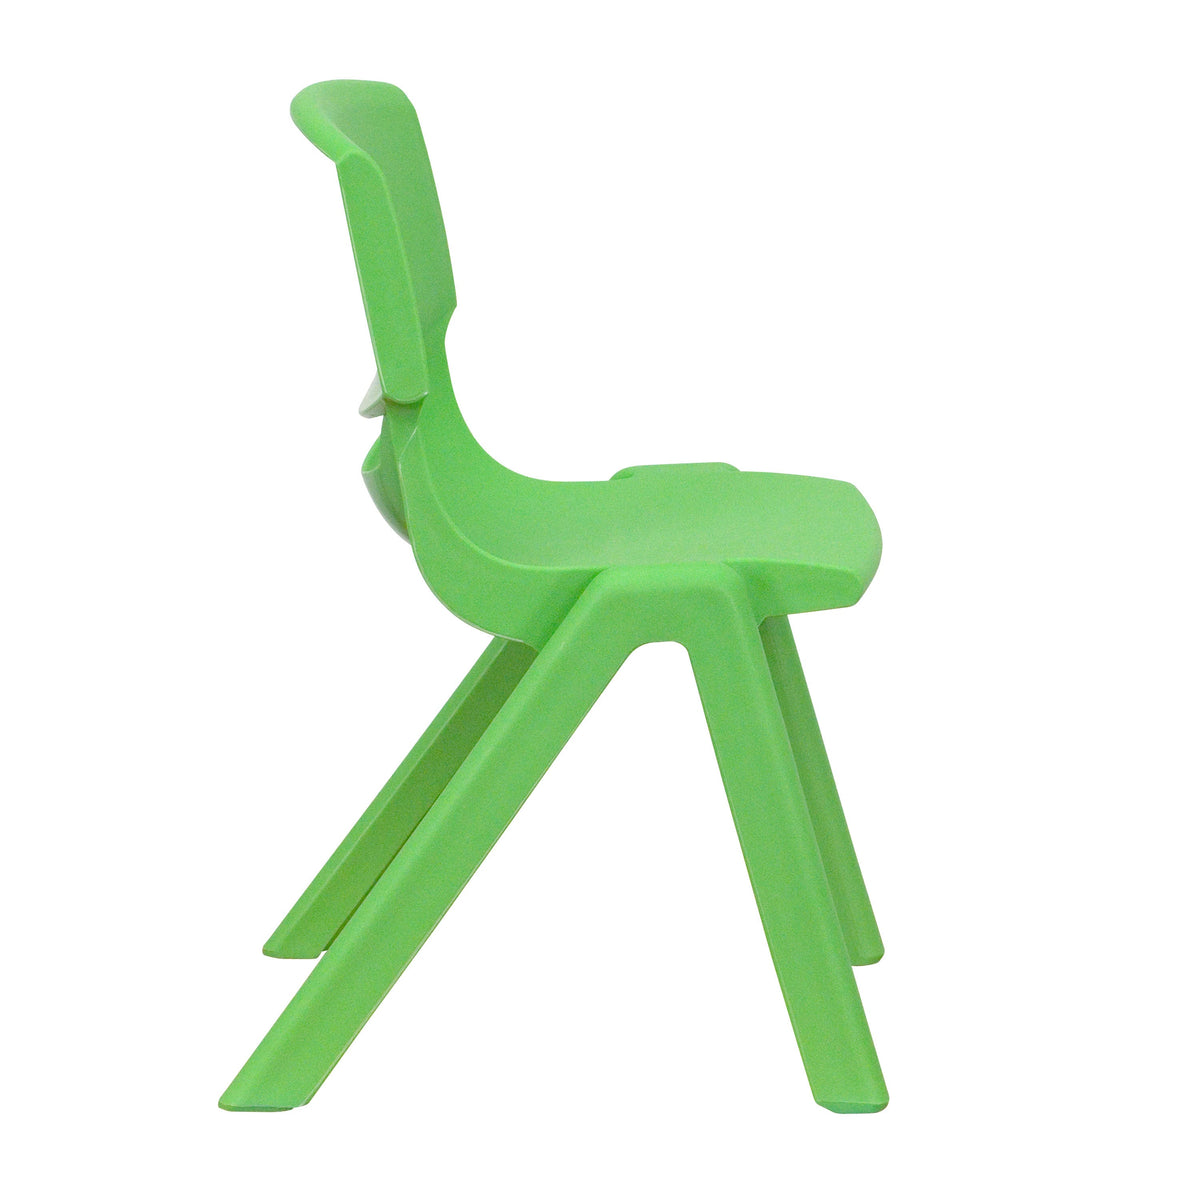 Green |#| 4 Pack Green Plastic Stack School Chair with 12inch Seat Height - Kids Chair